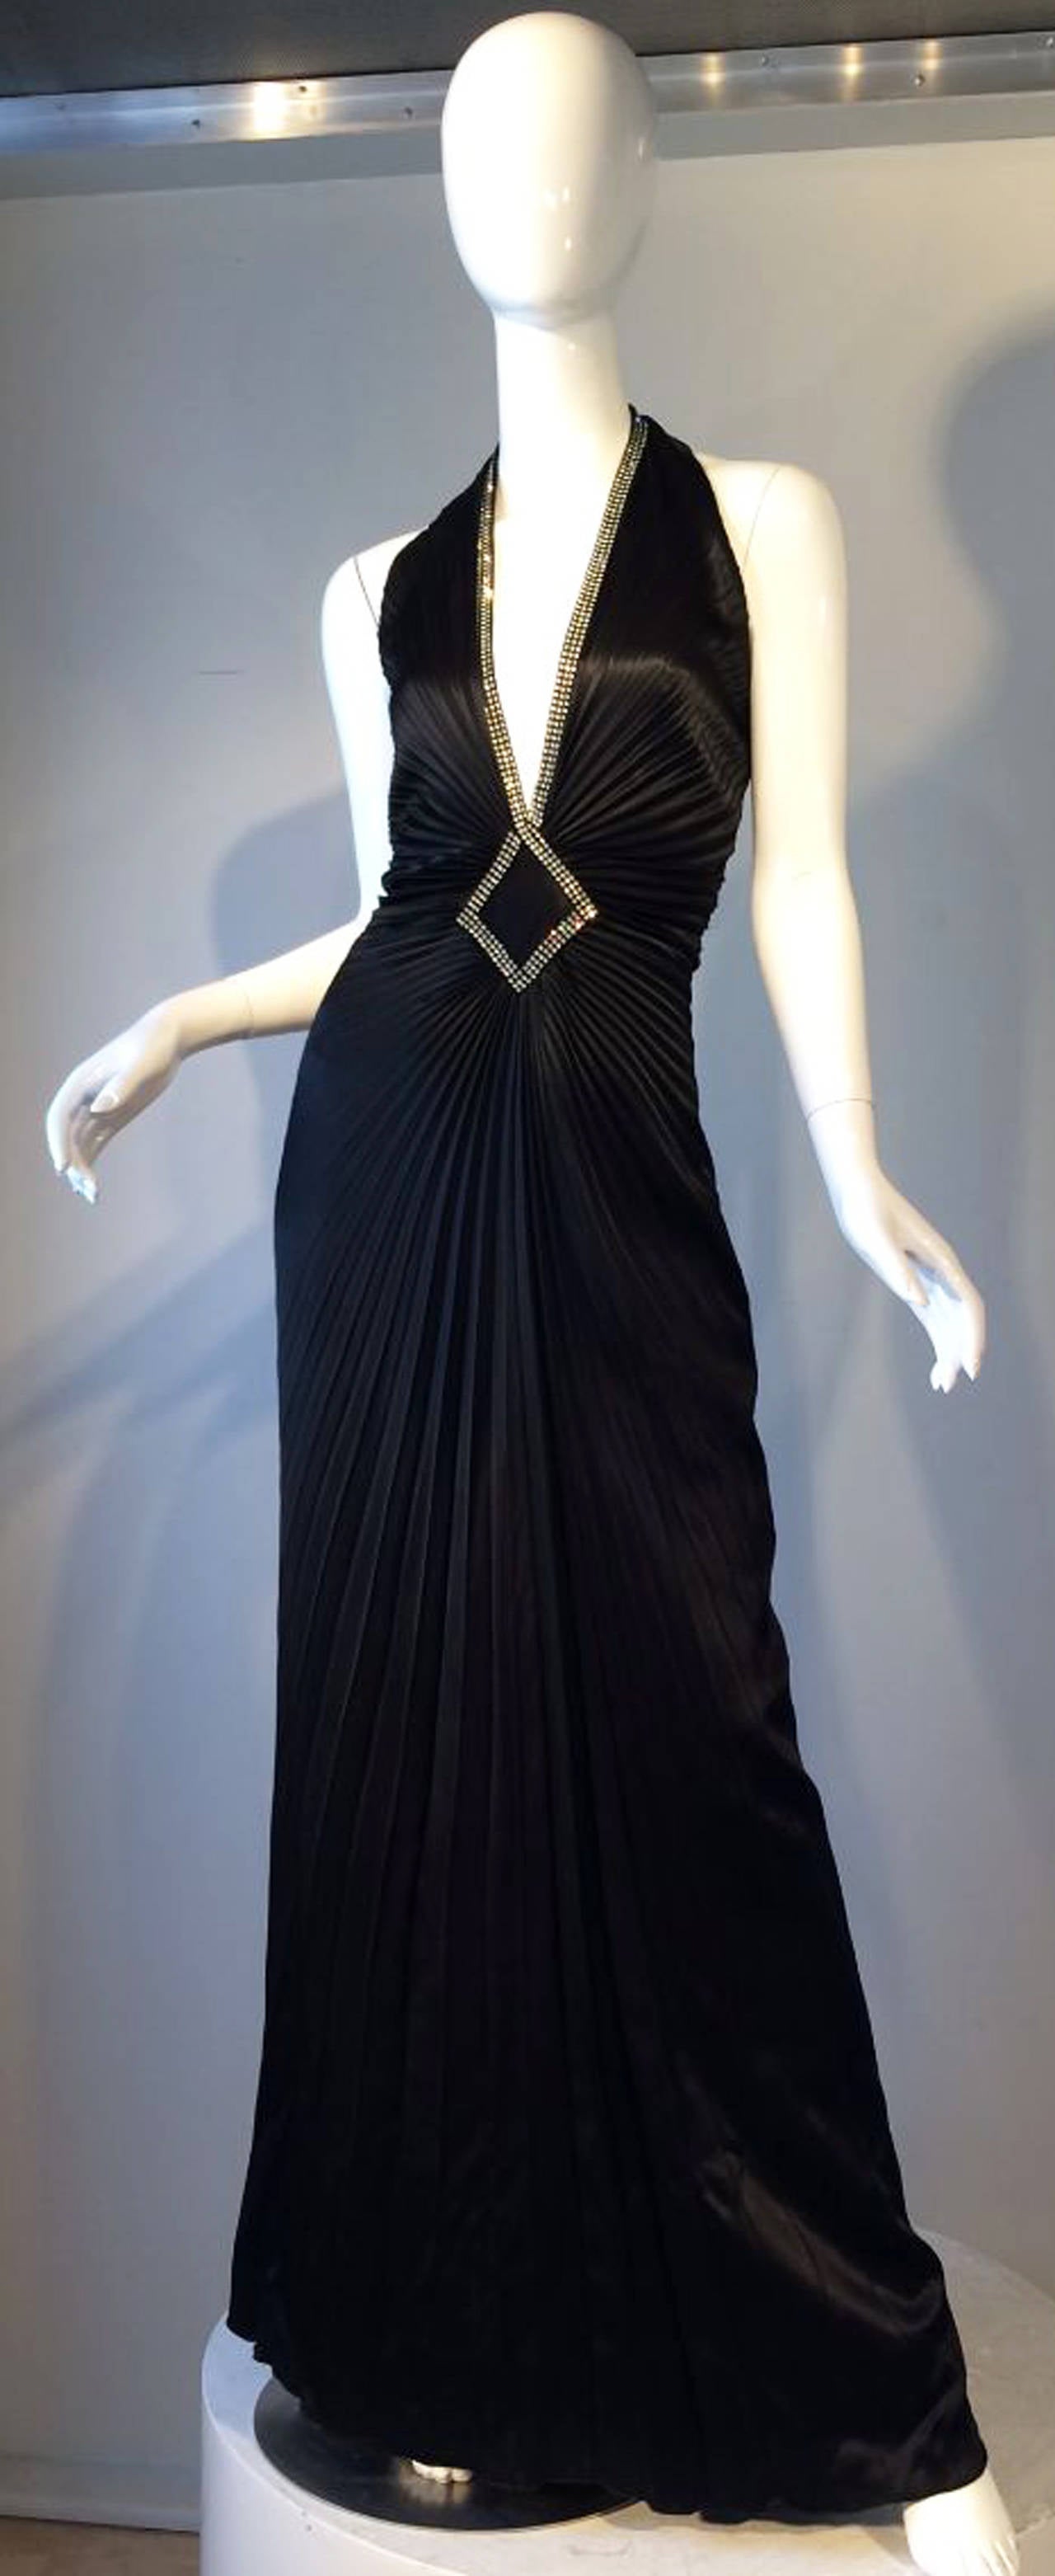 A fine and rare vintage Travilla 'jeweled' gown. Silky black starburst pleated fabric item with Swarovski crystal bodice trim. Item fully silk lined, zips up back. A iconic Hollywood starlet look from Travilla. Excellent.